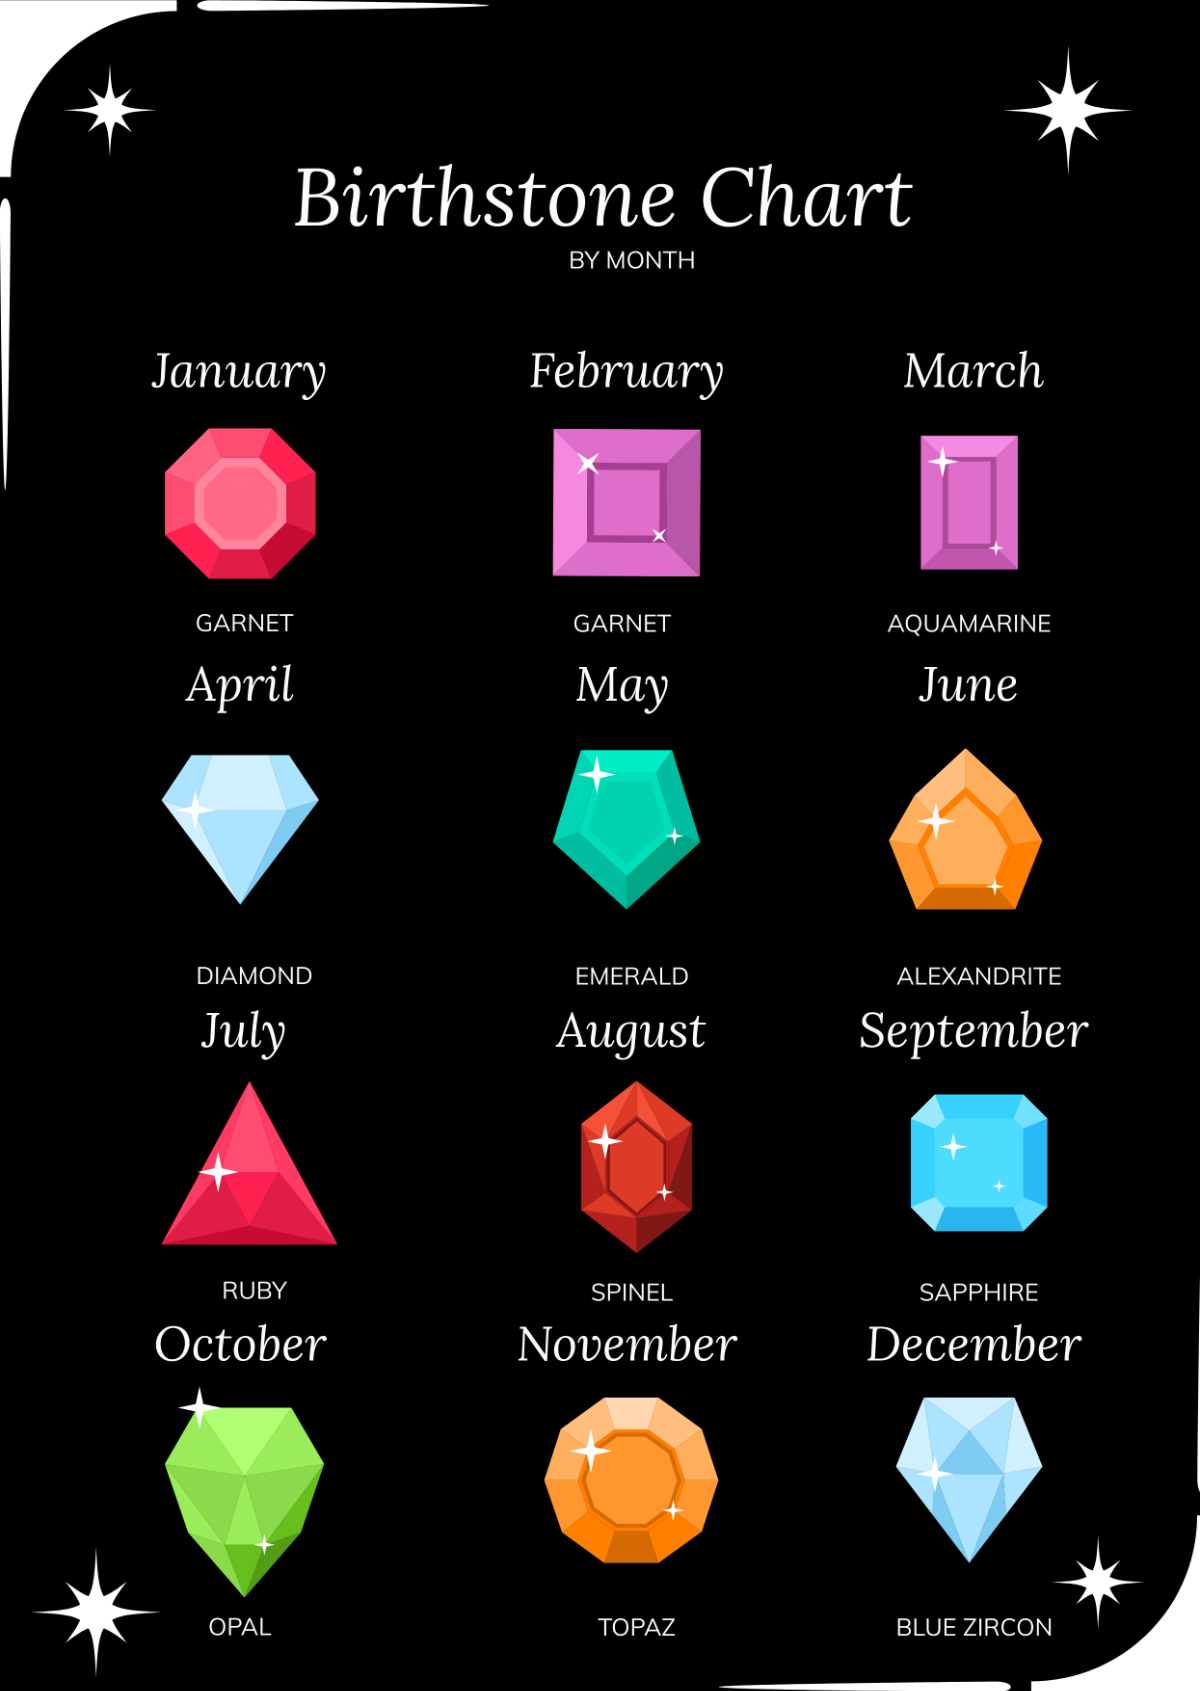 Birthstone Chart By Month